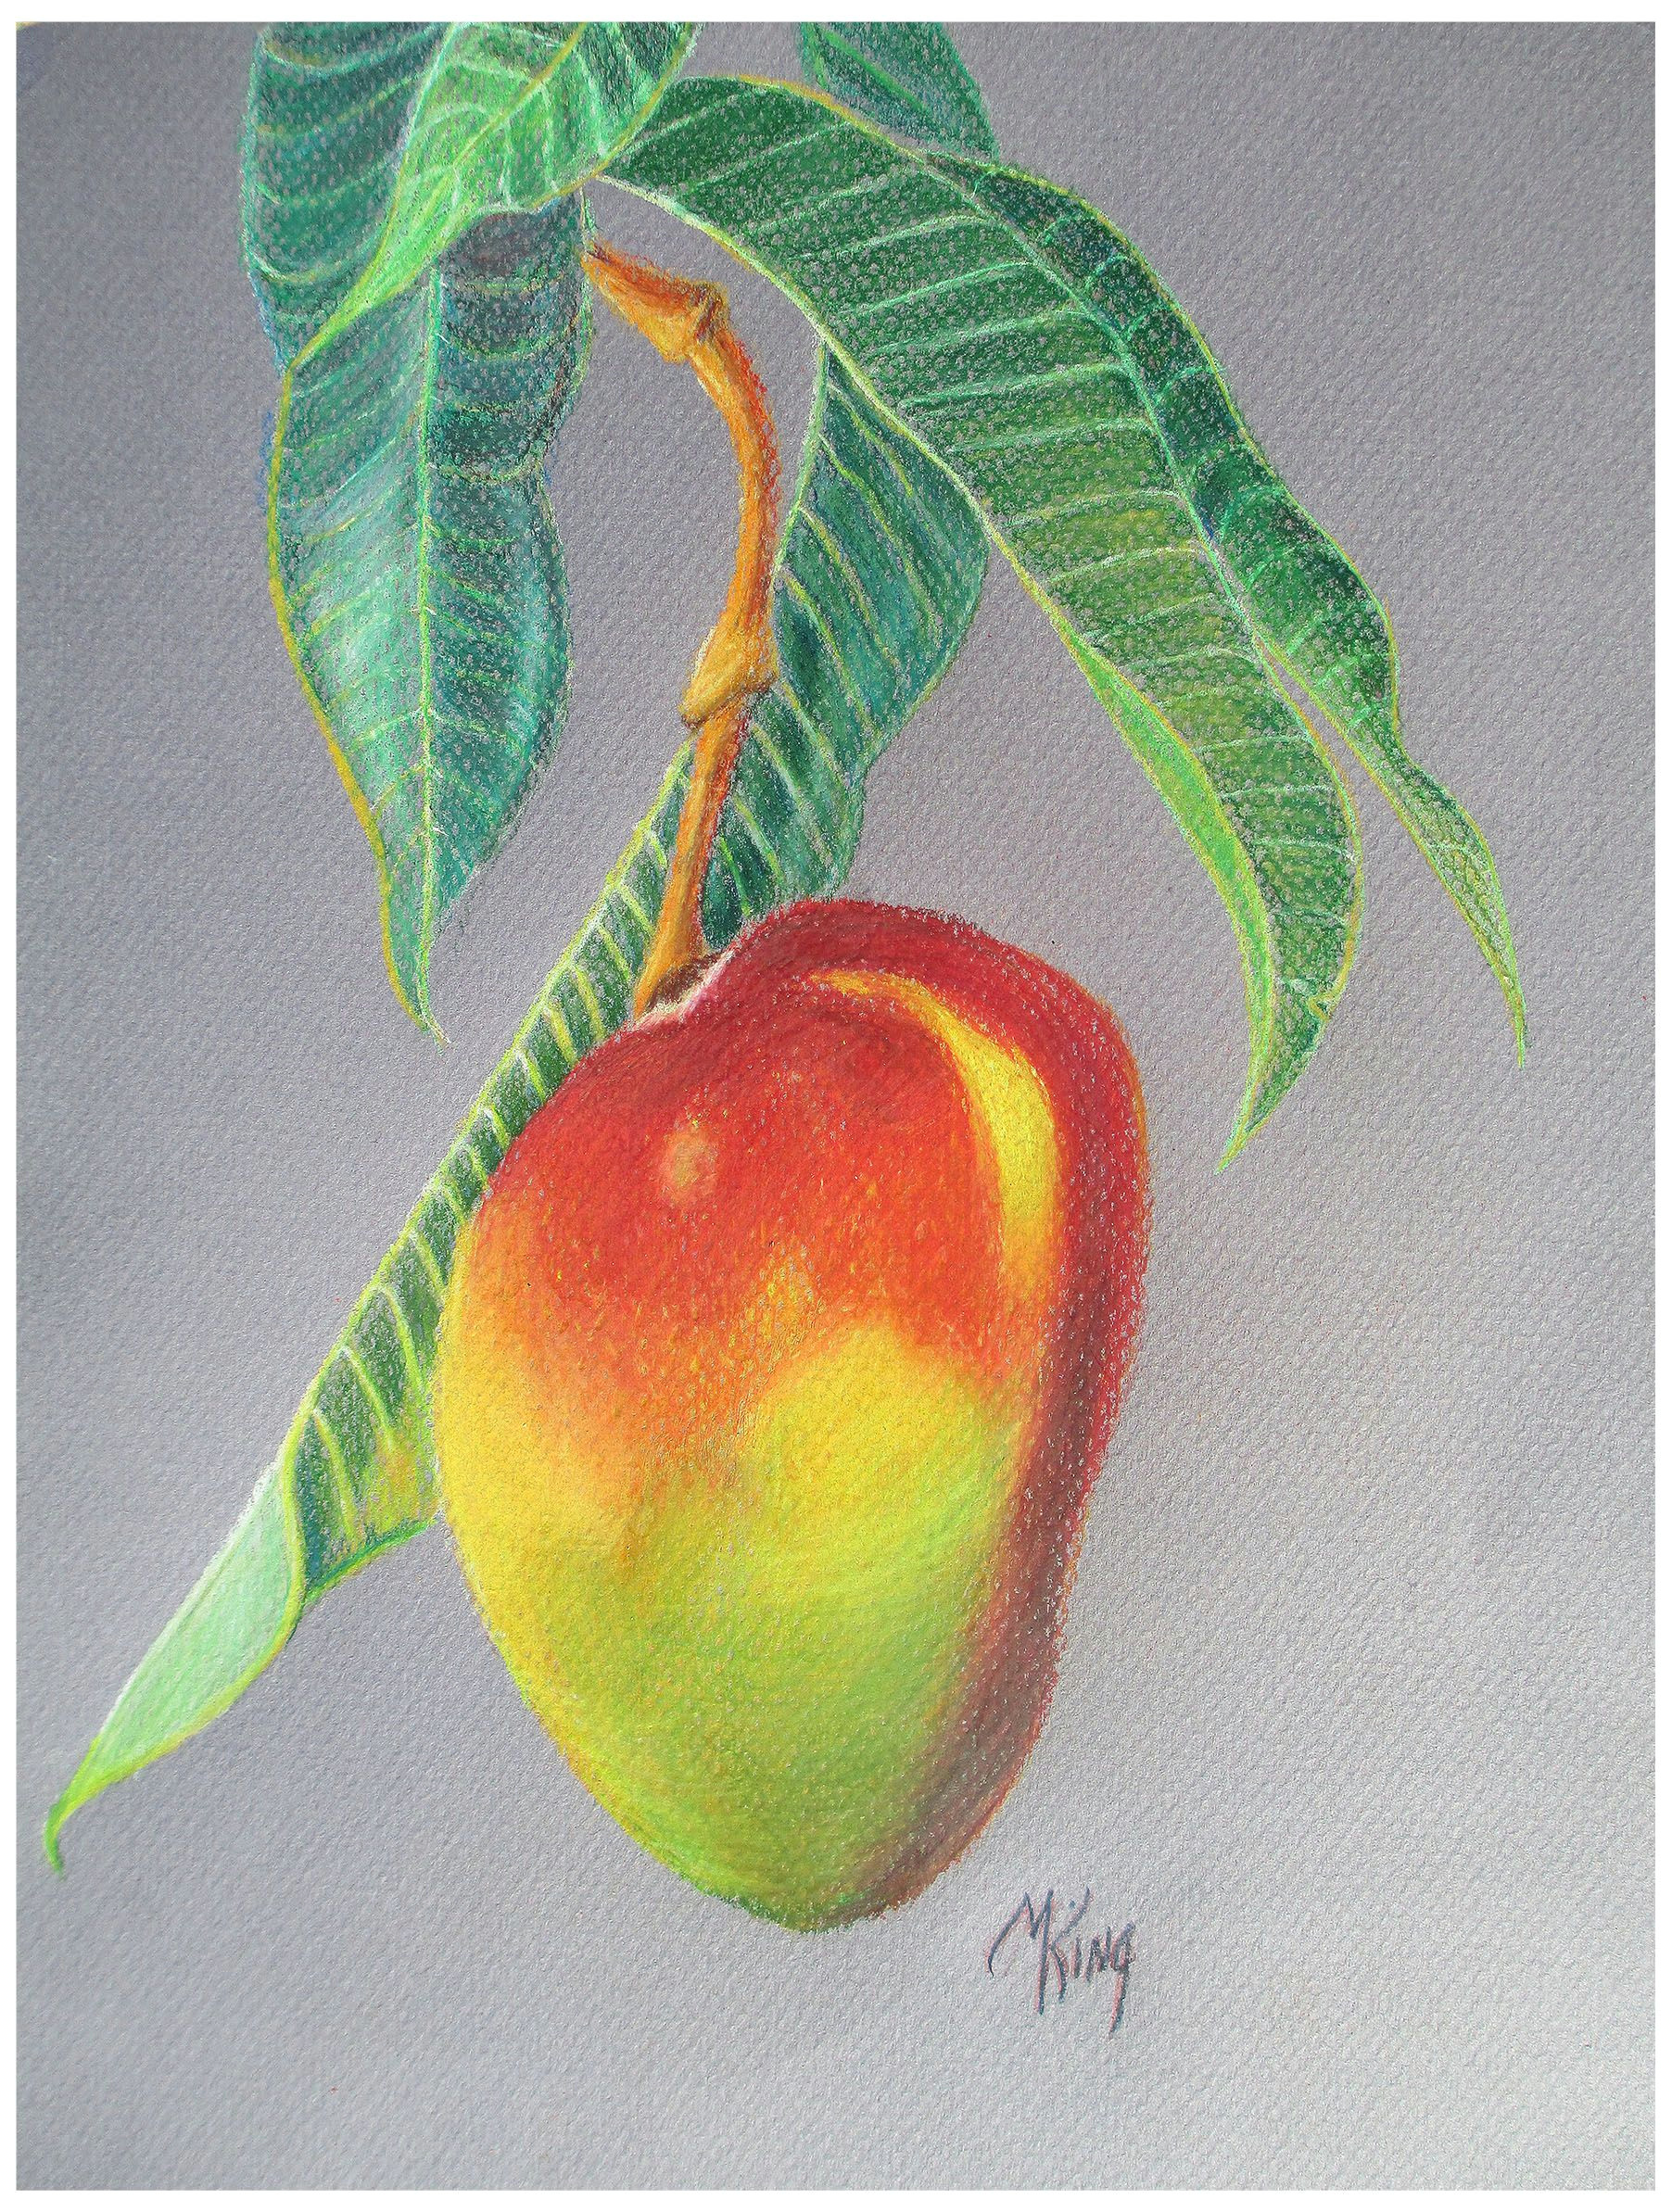 mango i could not resist drawing this luscious fruit